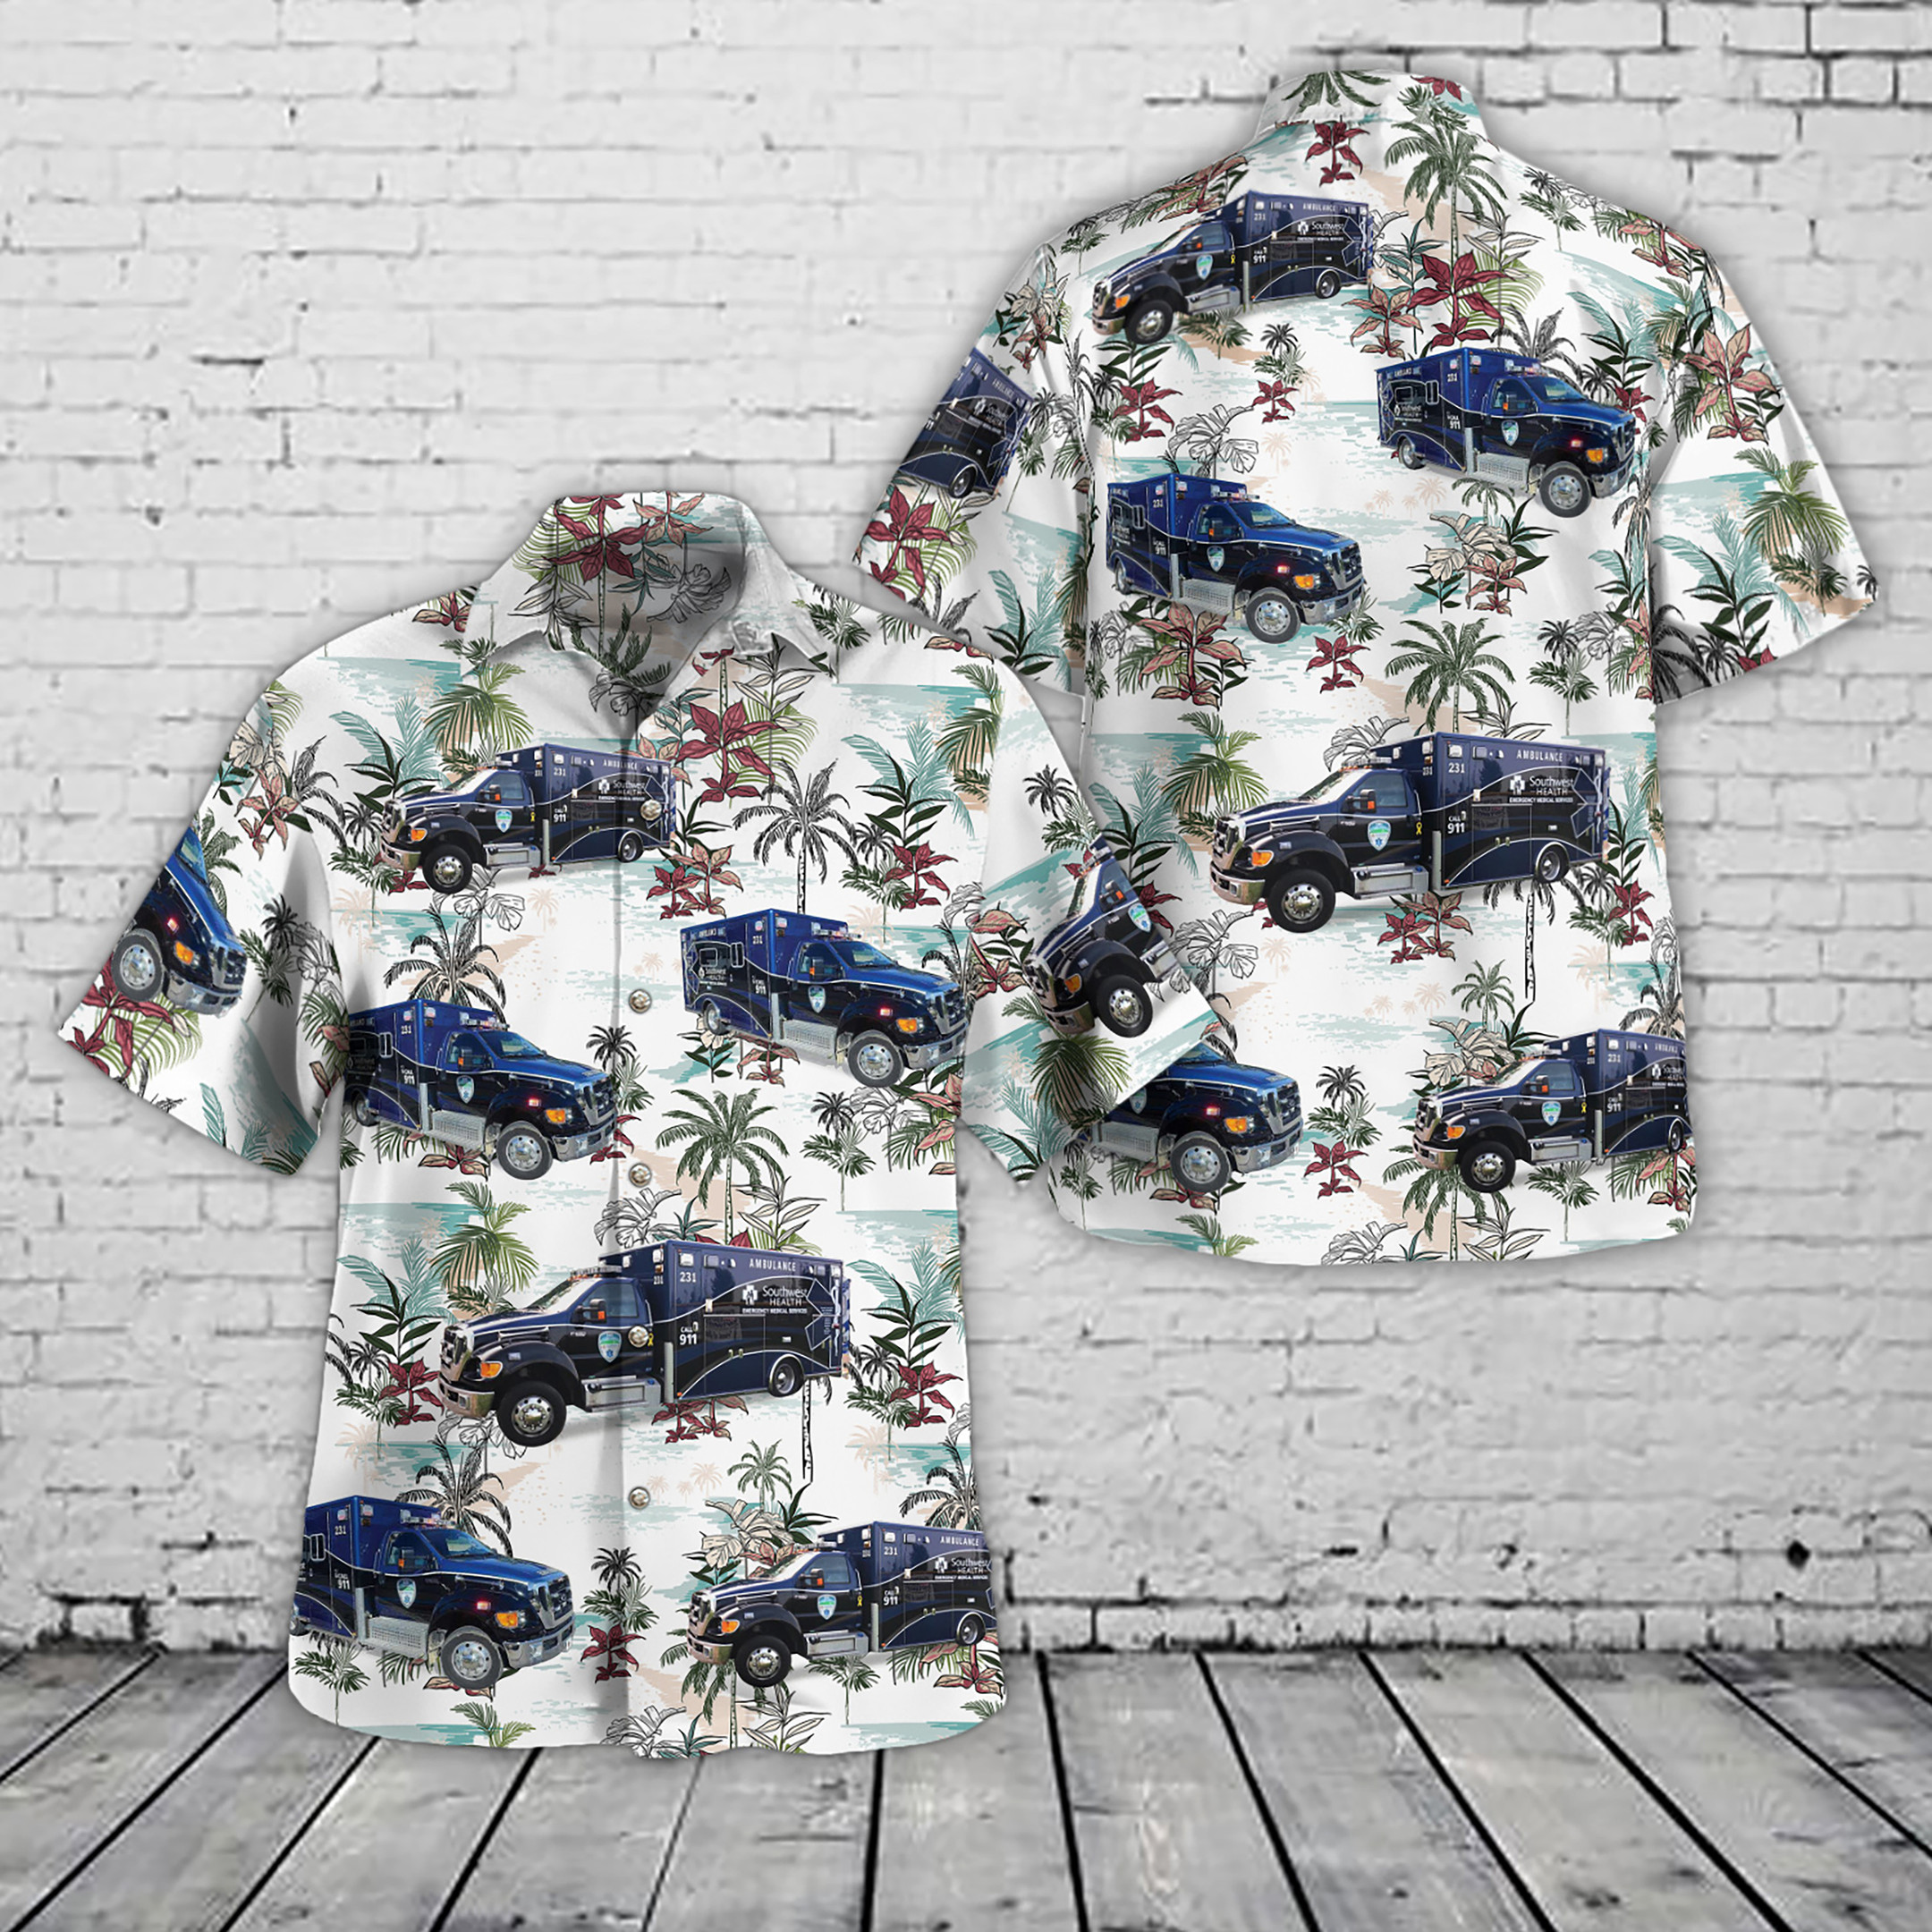 If you are in need of a new summertime look, pick up this Hawaiian shirt 73